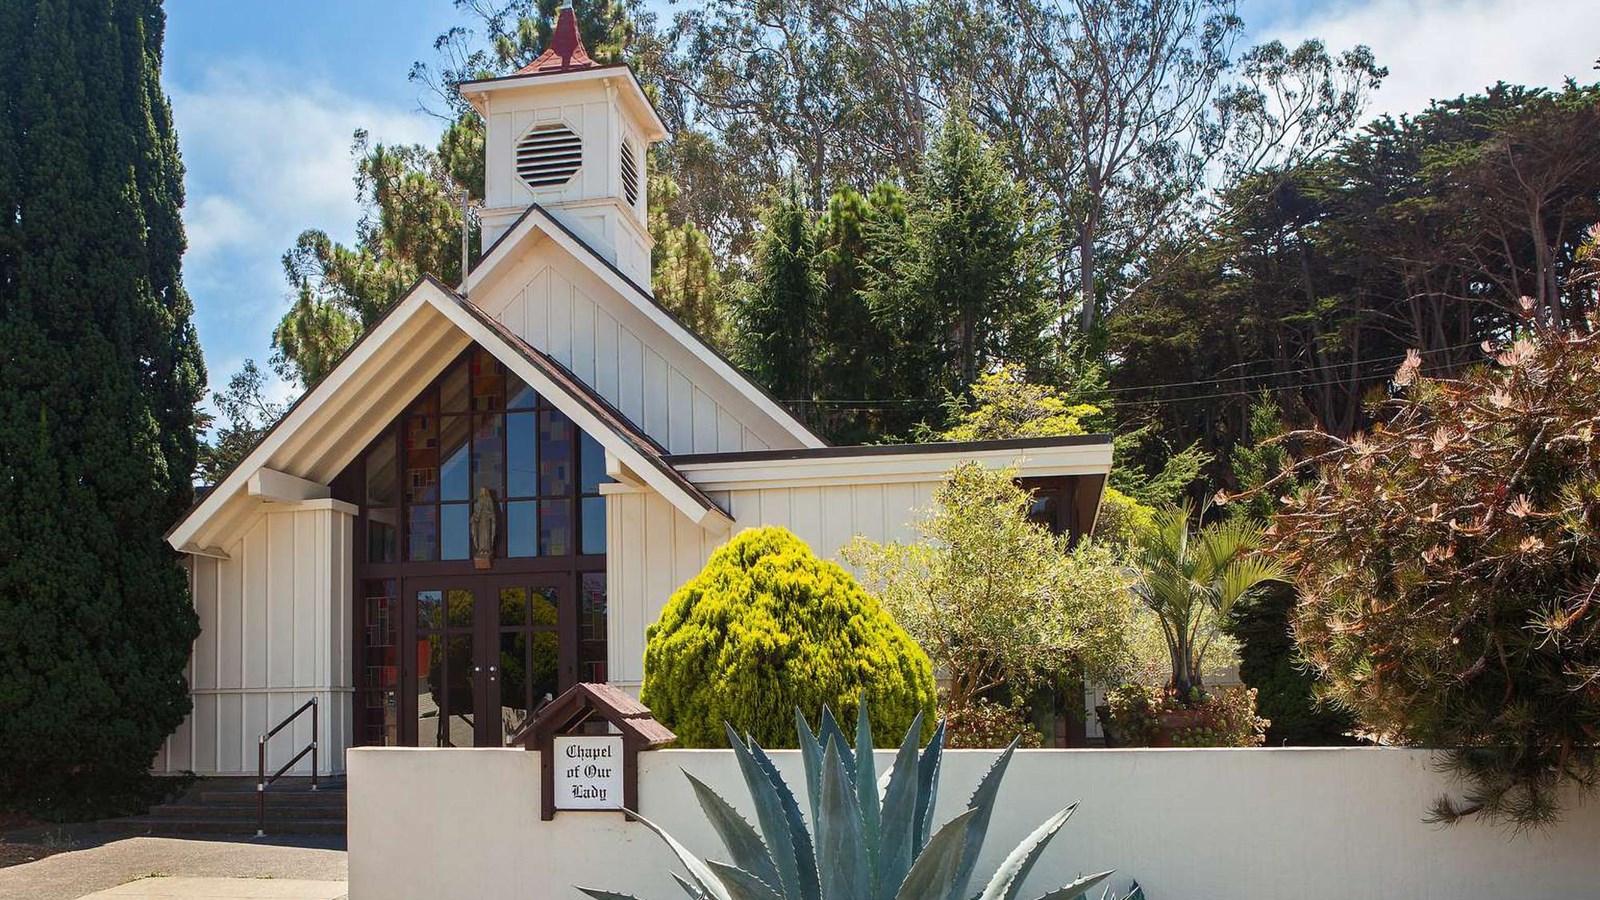 Exterior of the chapel and agave garden.